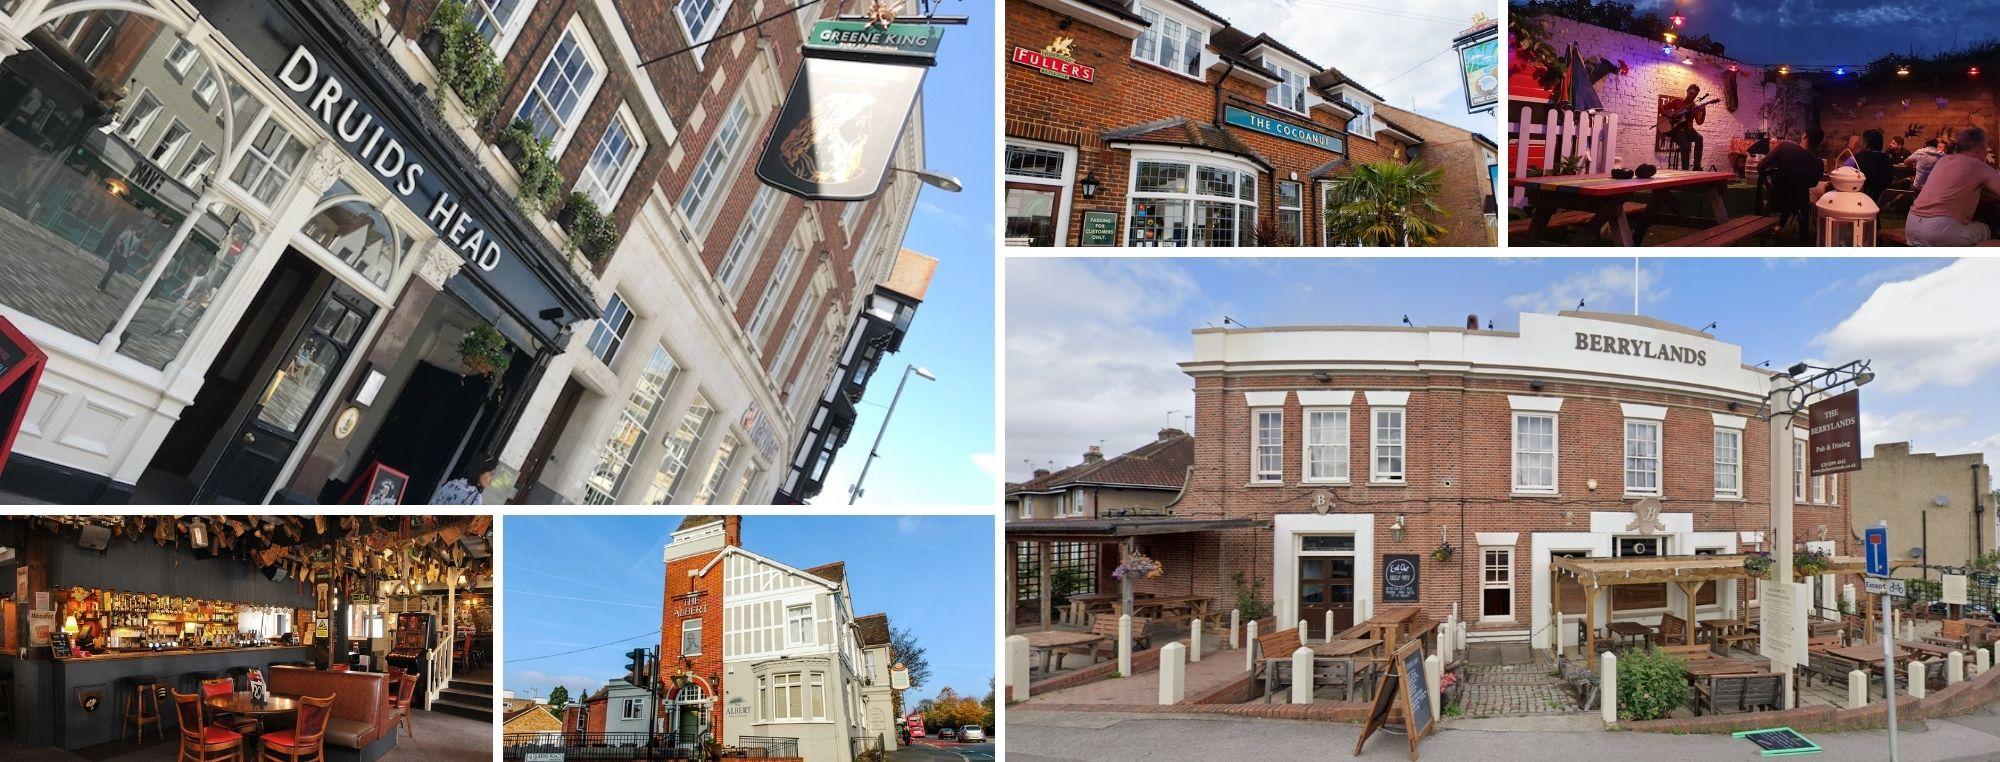 A collage of different pubs from around the borough including the Druids Head, The Cocoanut, The Berrylands and The Albert.